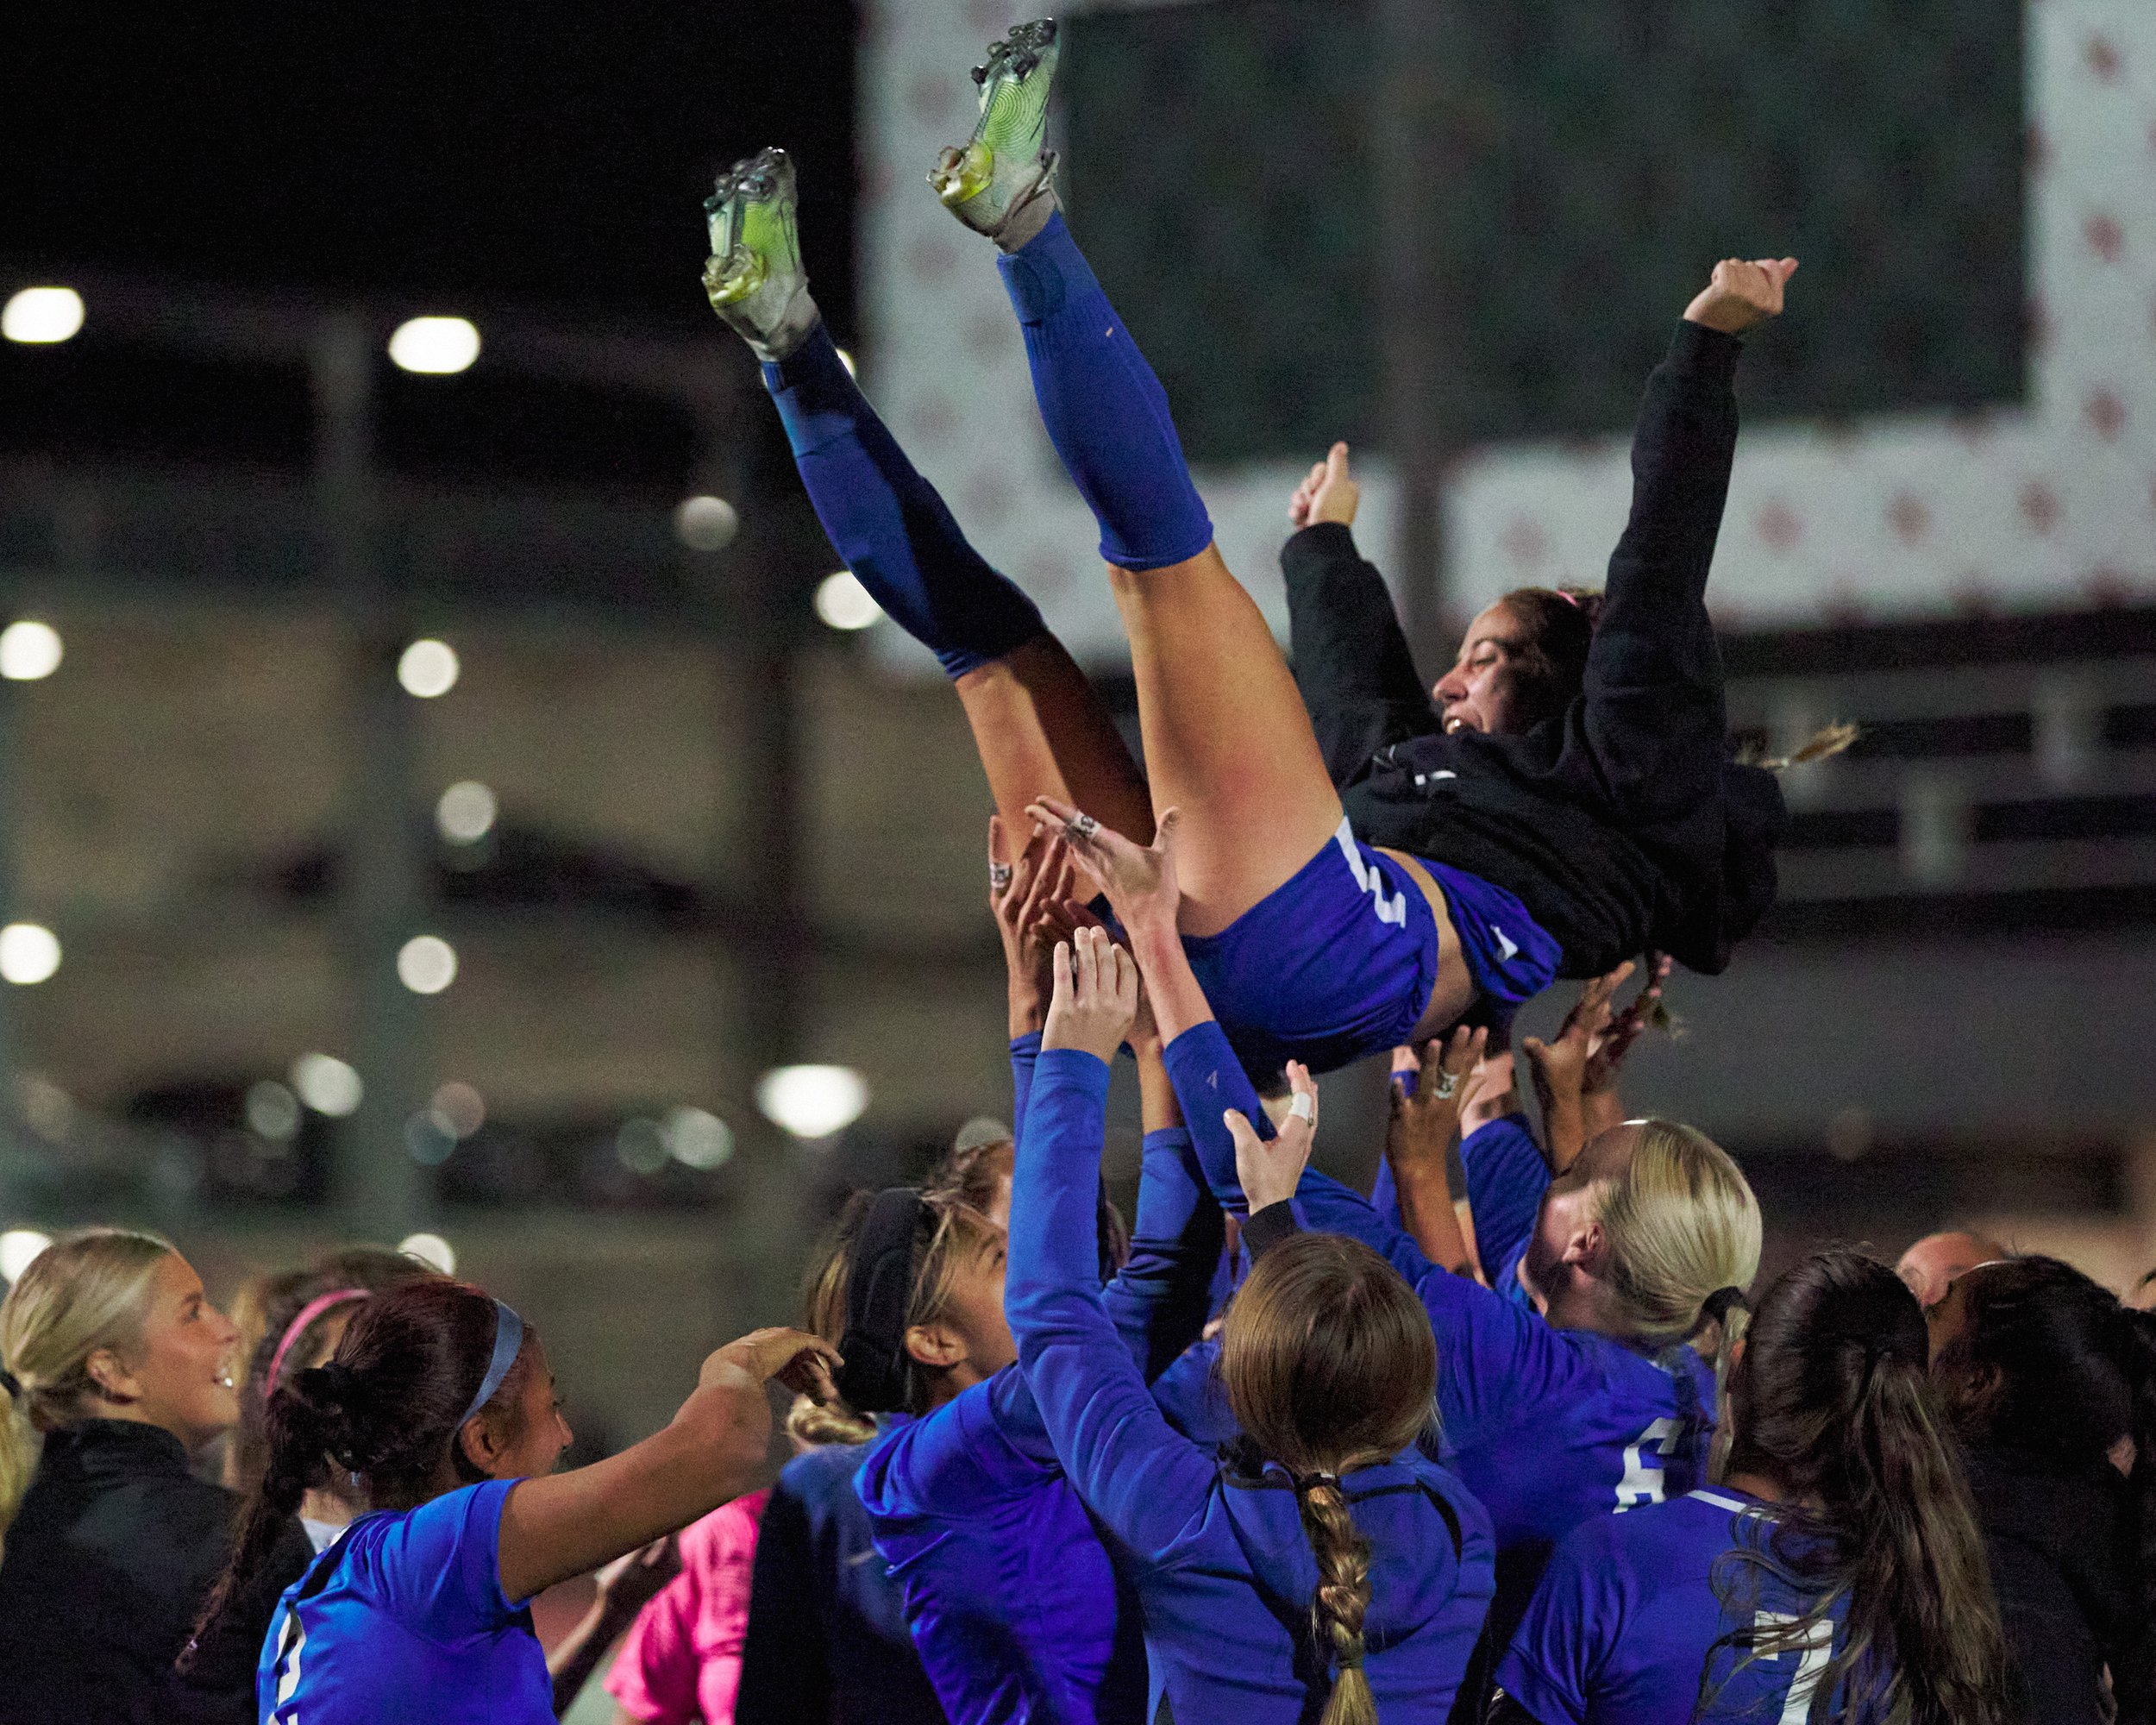  The Santa Monica College Corsairs Women's Soccer team toss Sophie Doumitt, who, from a corner kick, scored the sole goal of the evening, into the air in celebration of their 1-0 win against the Bakersfield College Renegades on Wednesday, Nov. 16, 20